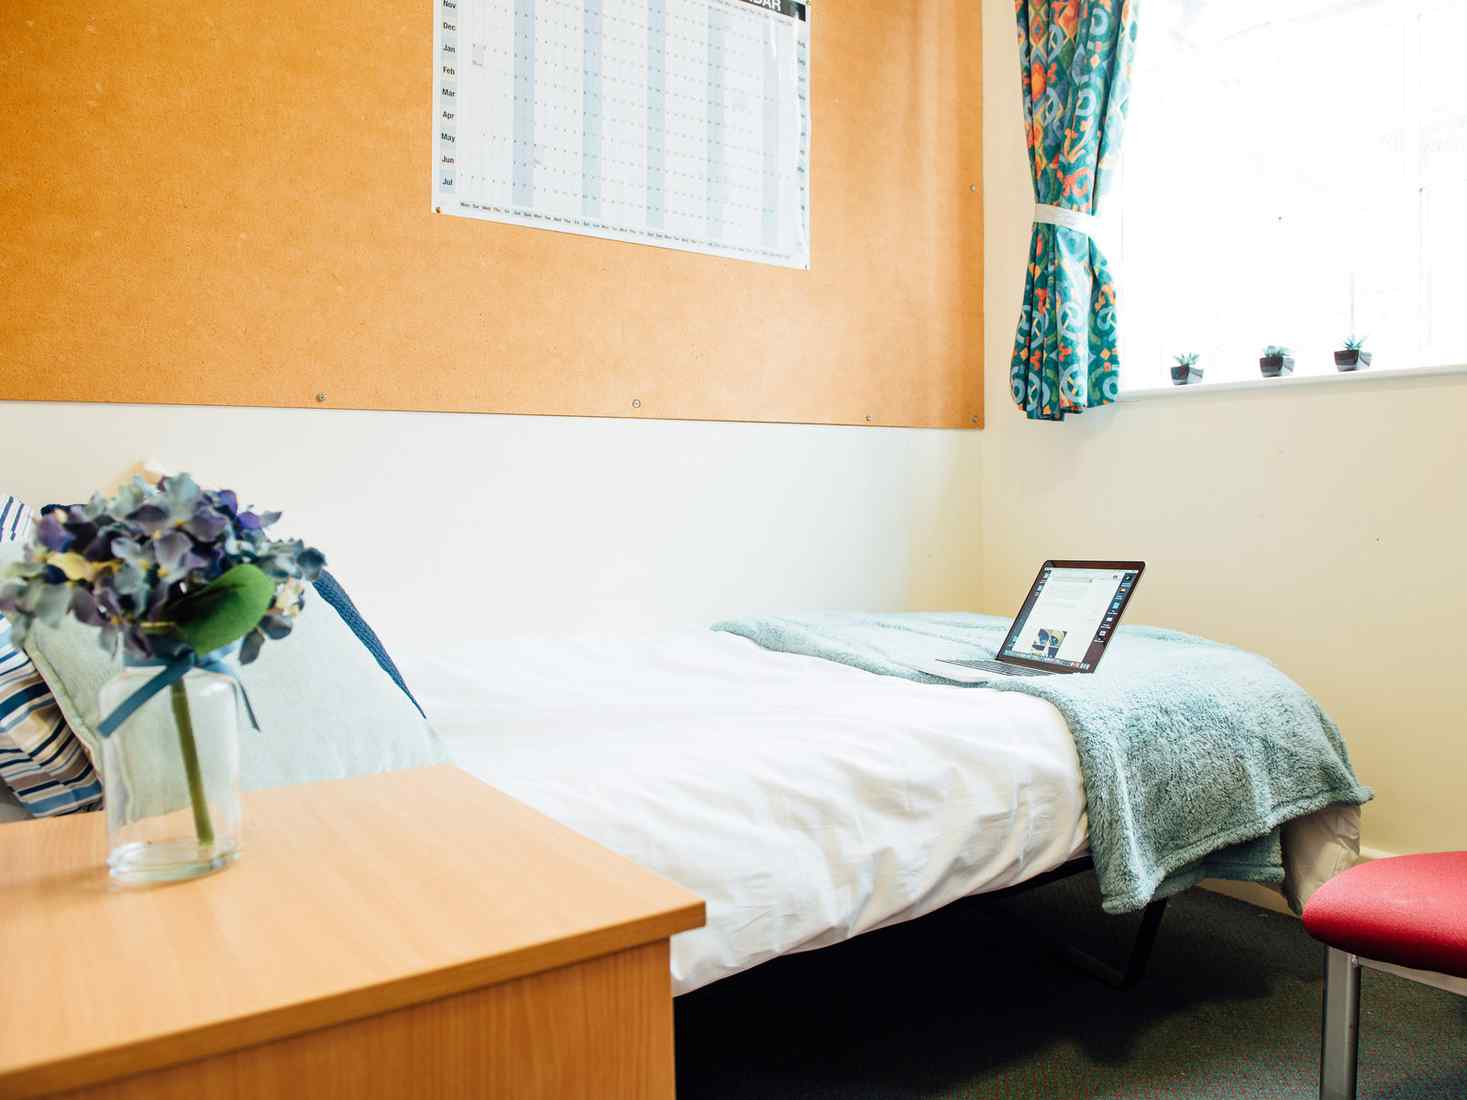 View of a single bed and bedside table in a standard ensuite room at City Residence. A large noticeboard is on the wall above the bed. 